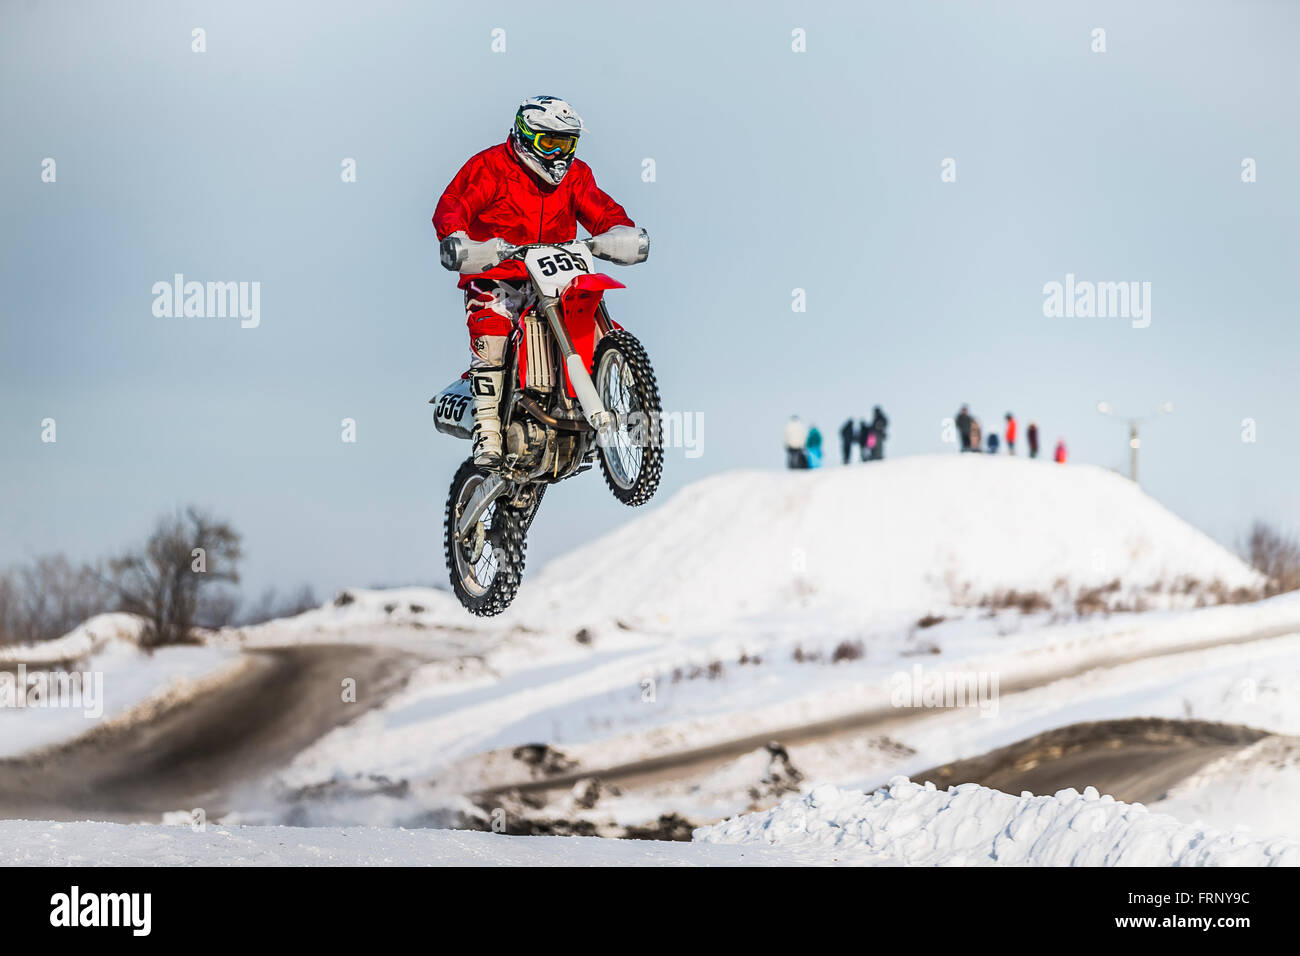 high jump and flight of motorcycle racer during Cup Winter motocross Stock Photo